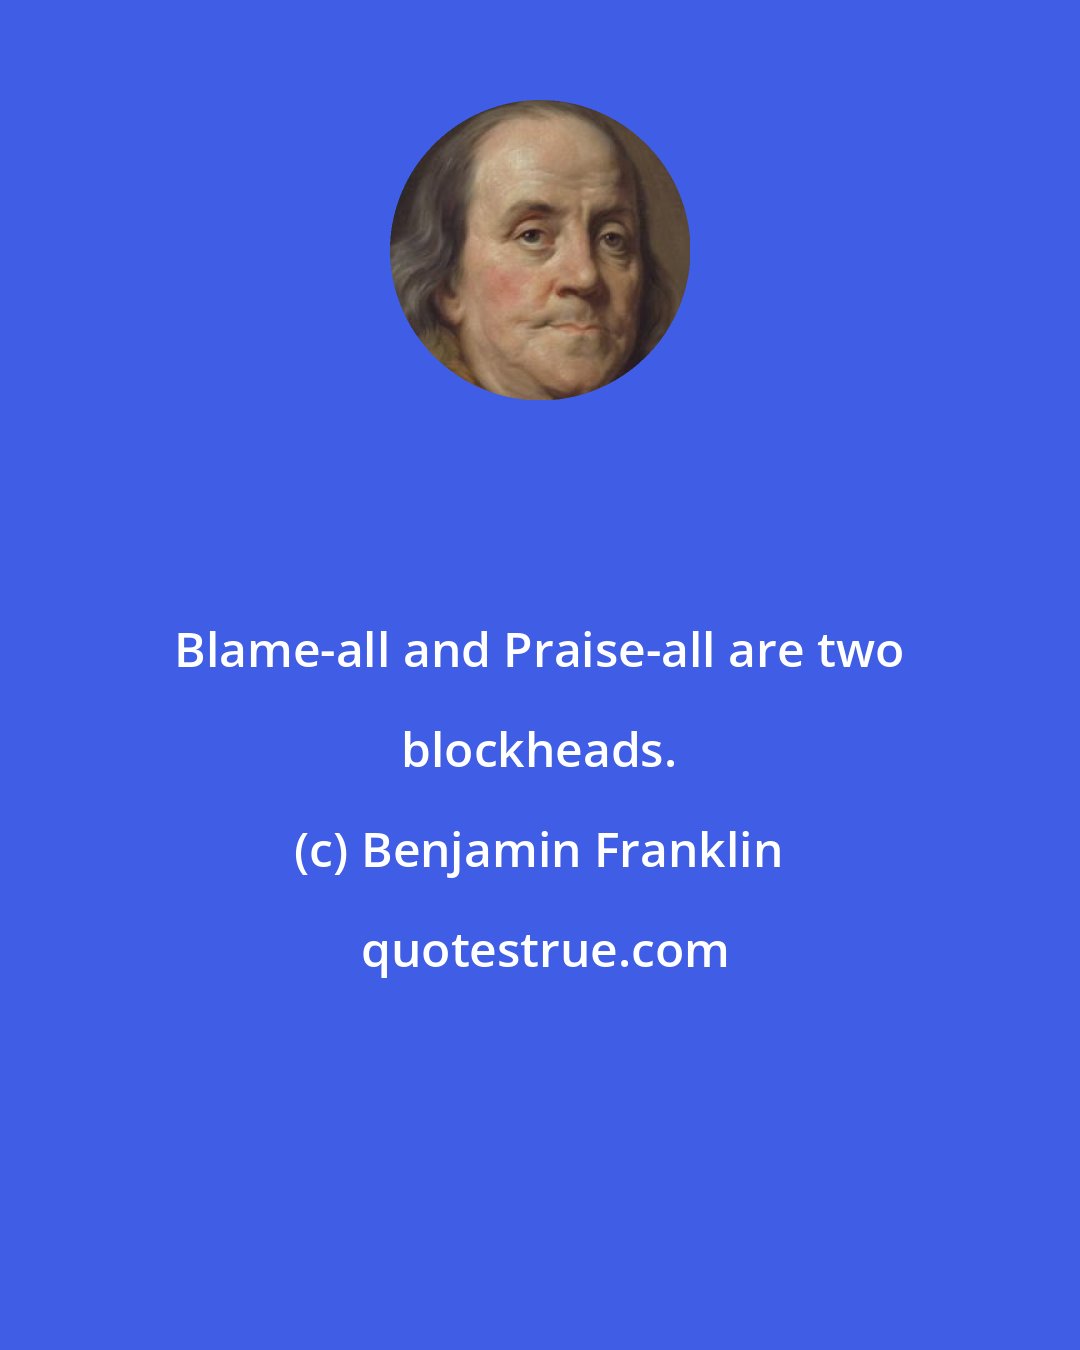 Benjamin Franklin: Blame-all and Praise-all are two blockheads.